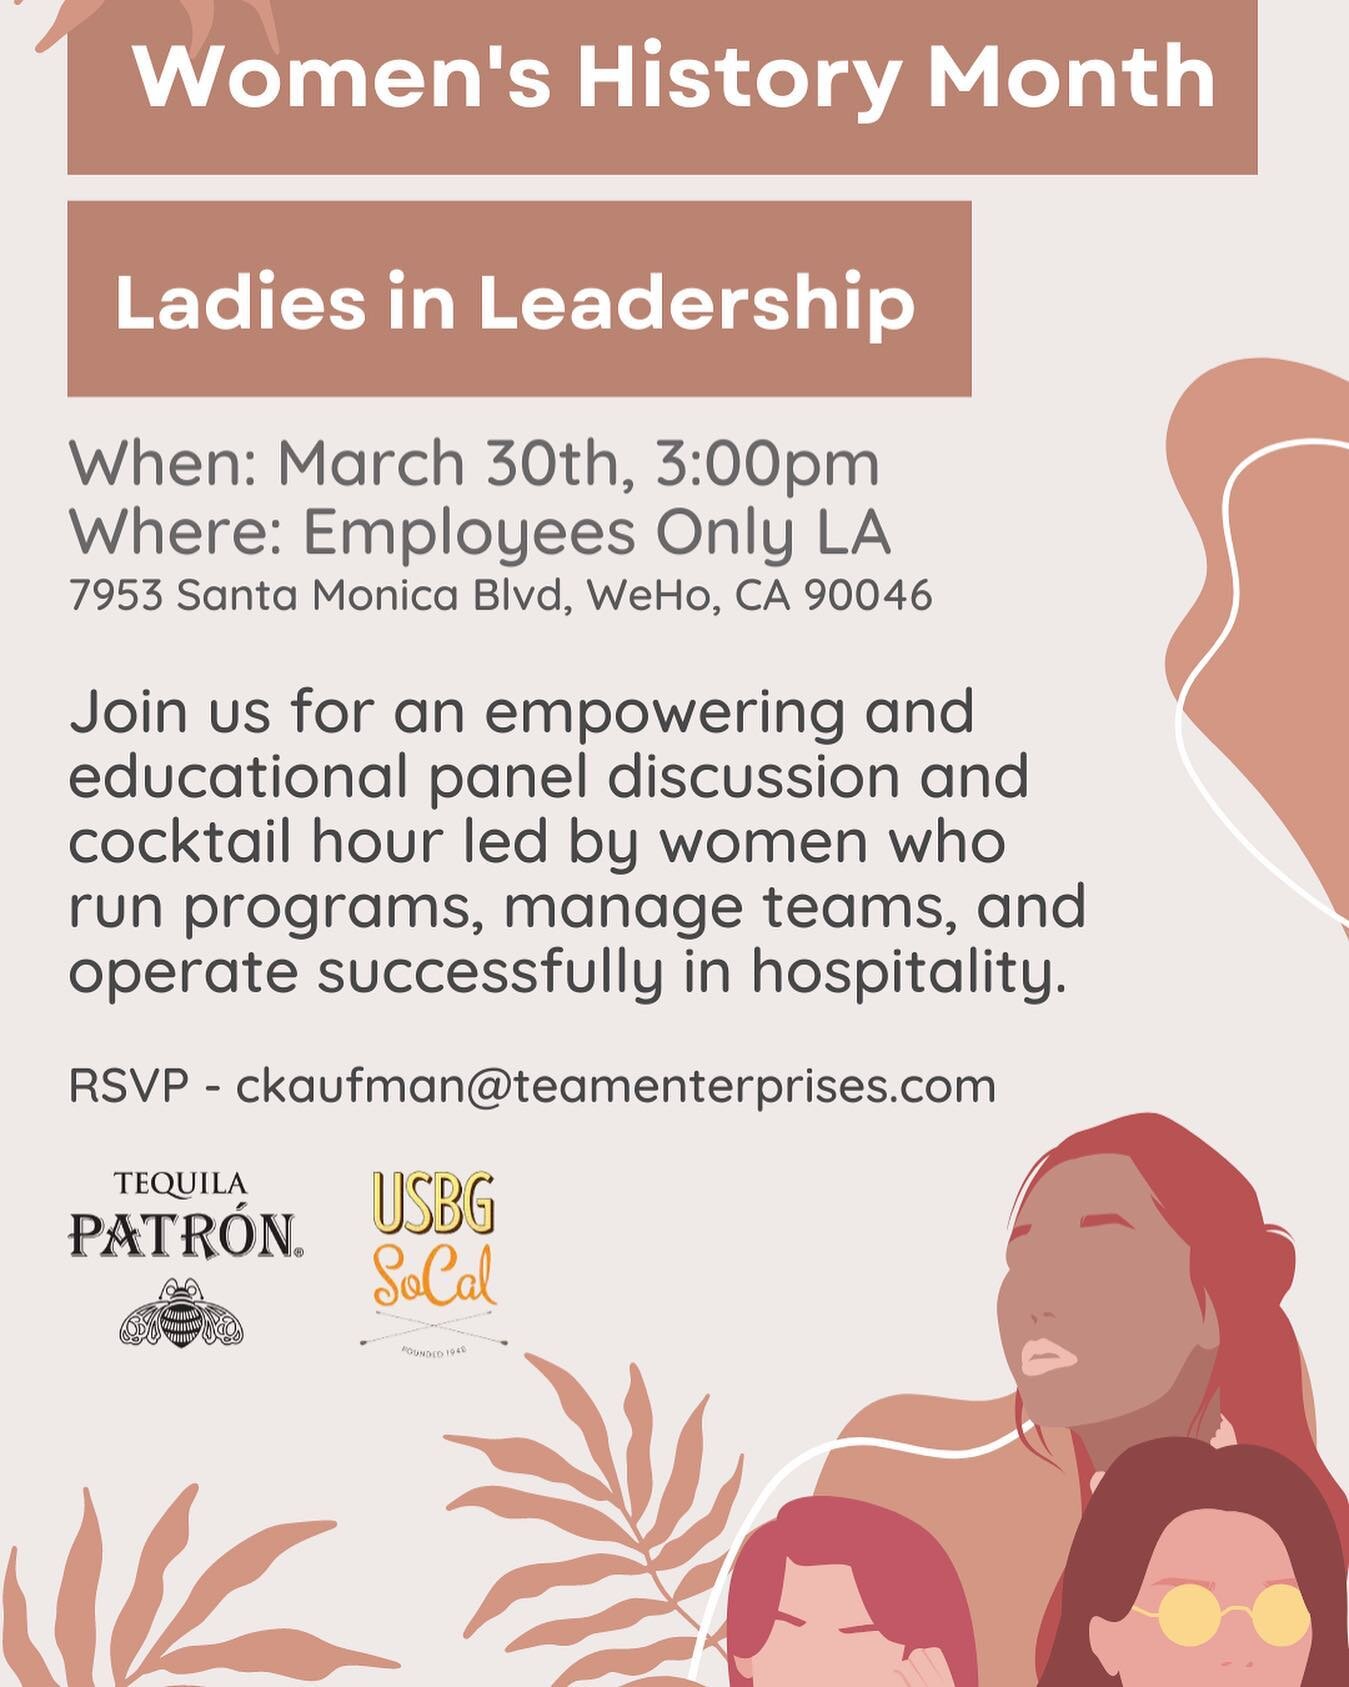 Join us tomorrow @employeesonlyla for a panel discussion and refreshments brought to you by @patron &amp; @usbgsocal !

Please RSVP to save your seat, see you all there!